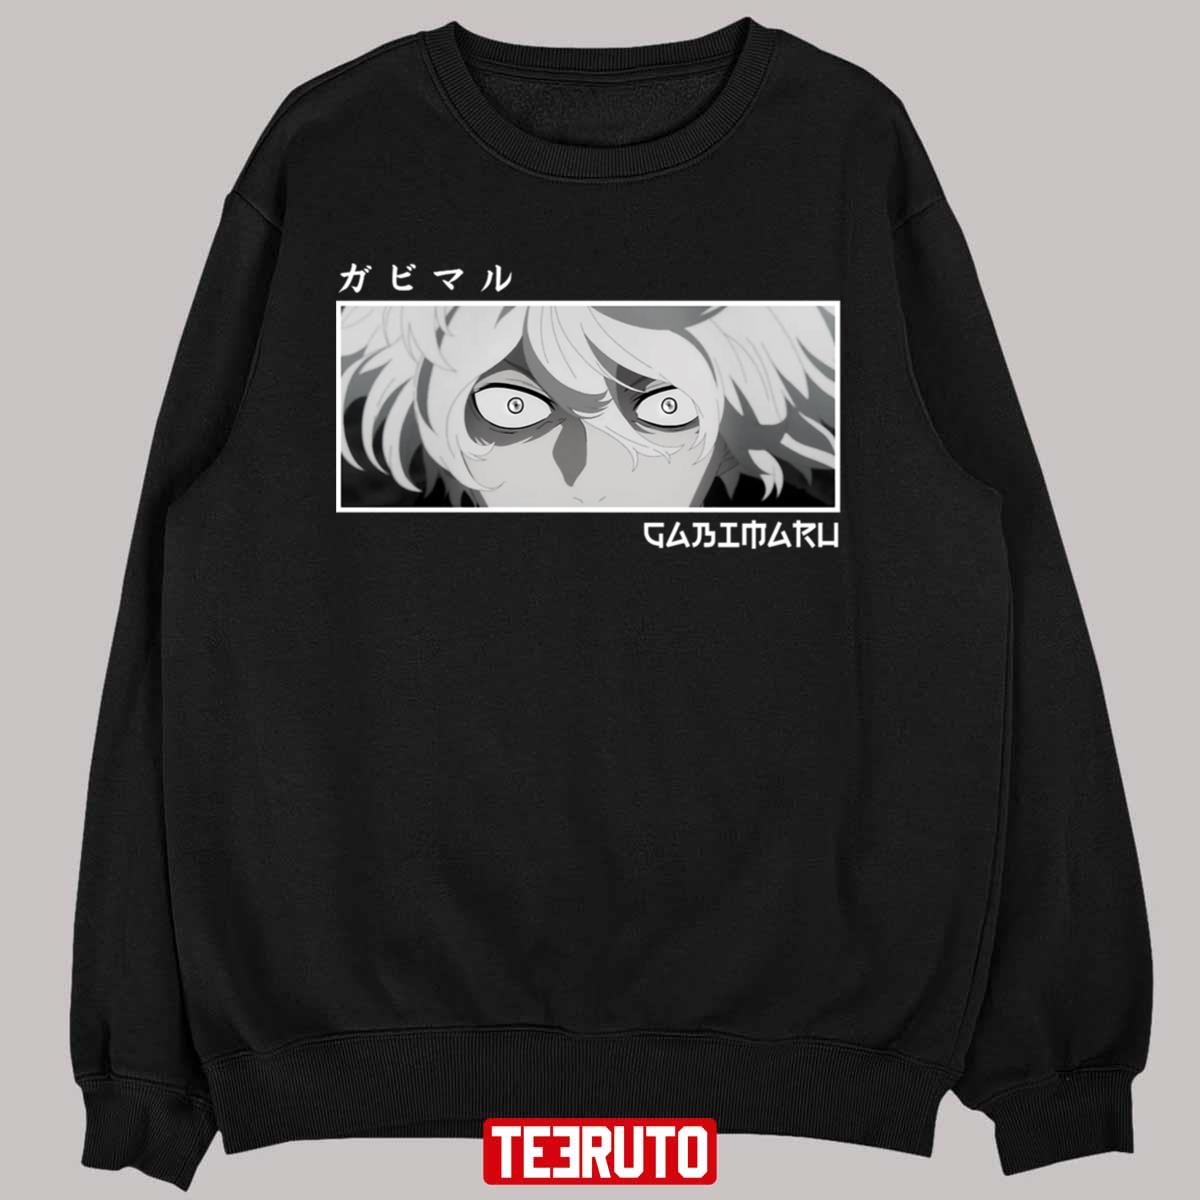 Scary Eyes Gabimaru In Japanese Hell's Paradise For Fans Unisex T-Shirt